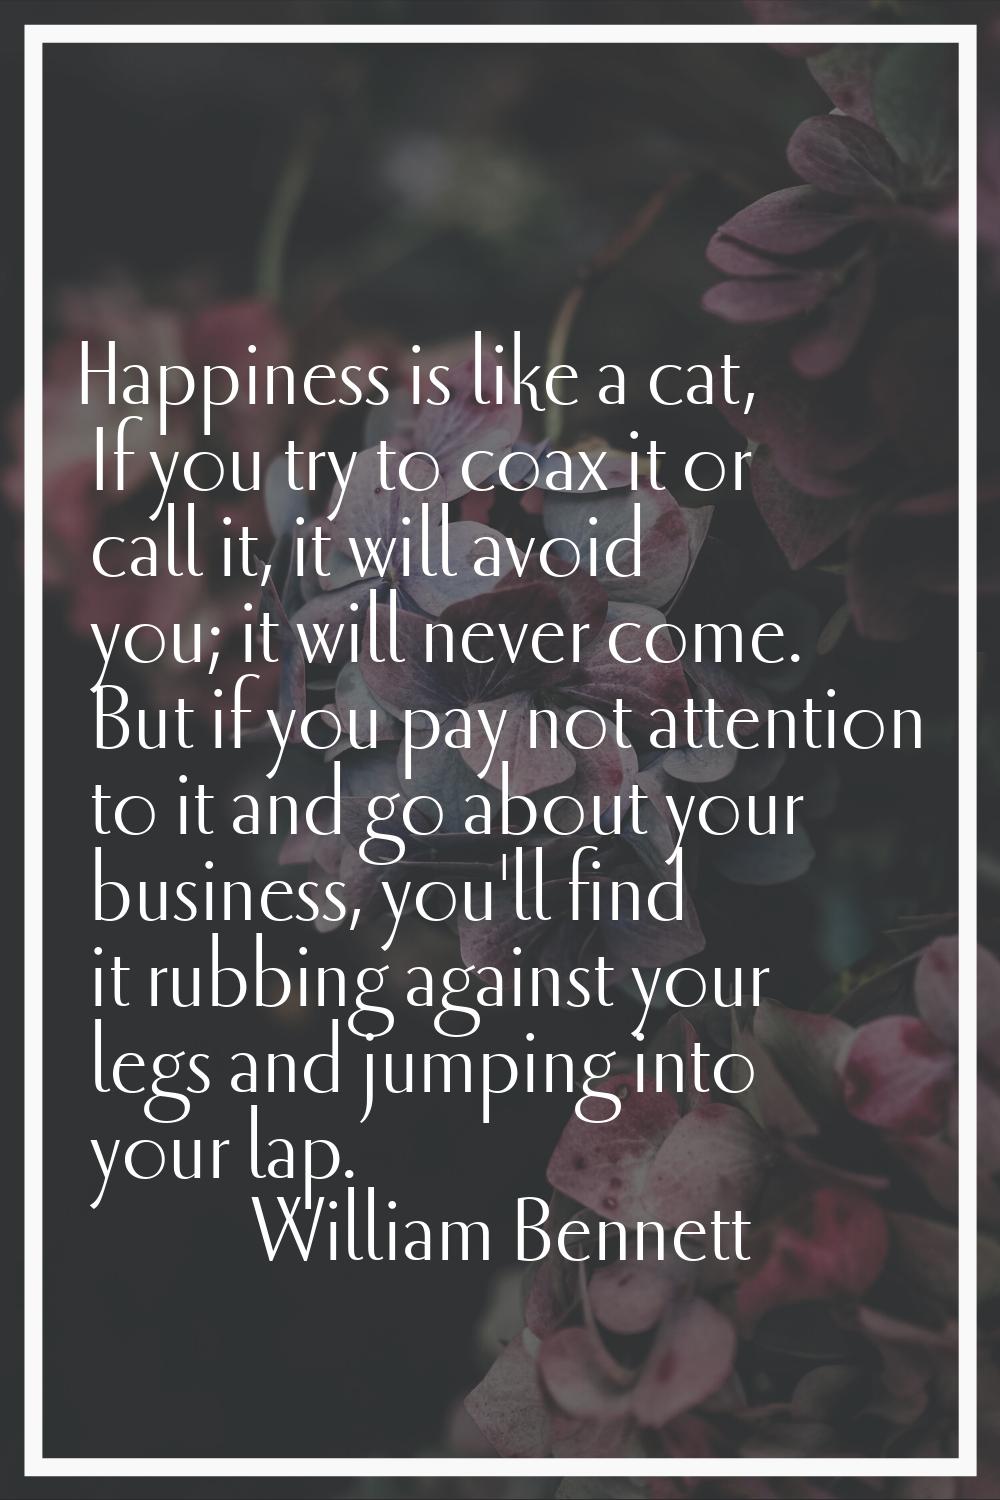 Happiness is like a cat, If you try to coax it or call it, it will avoid you; it will never come. B